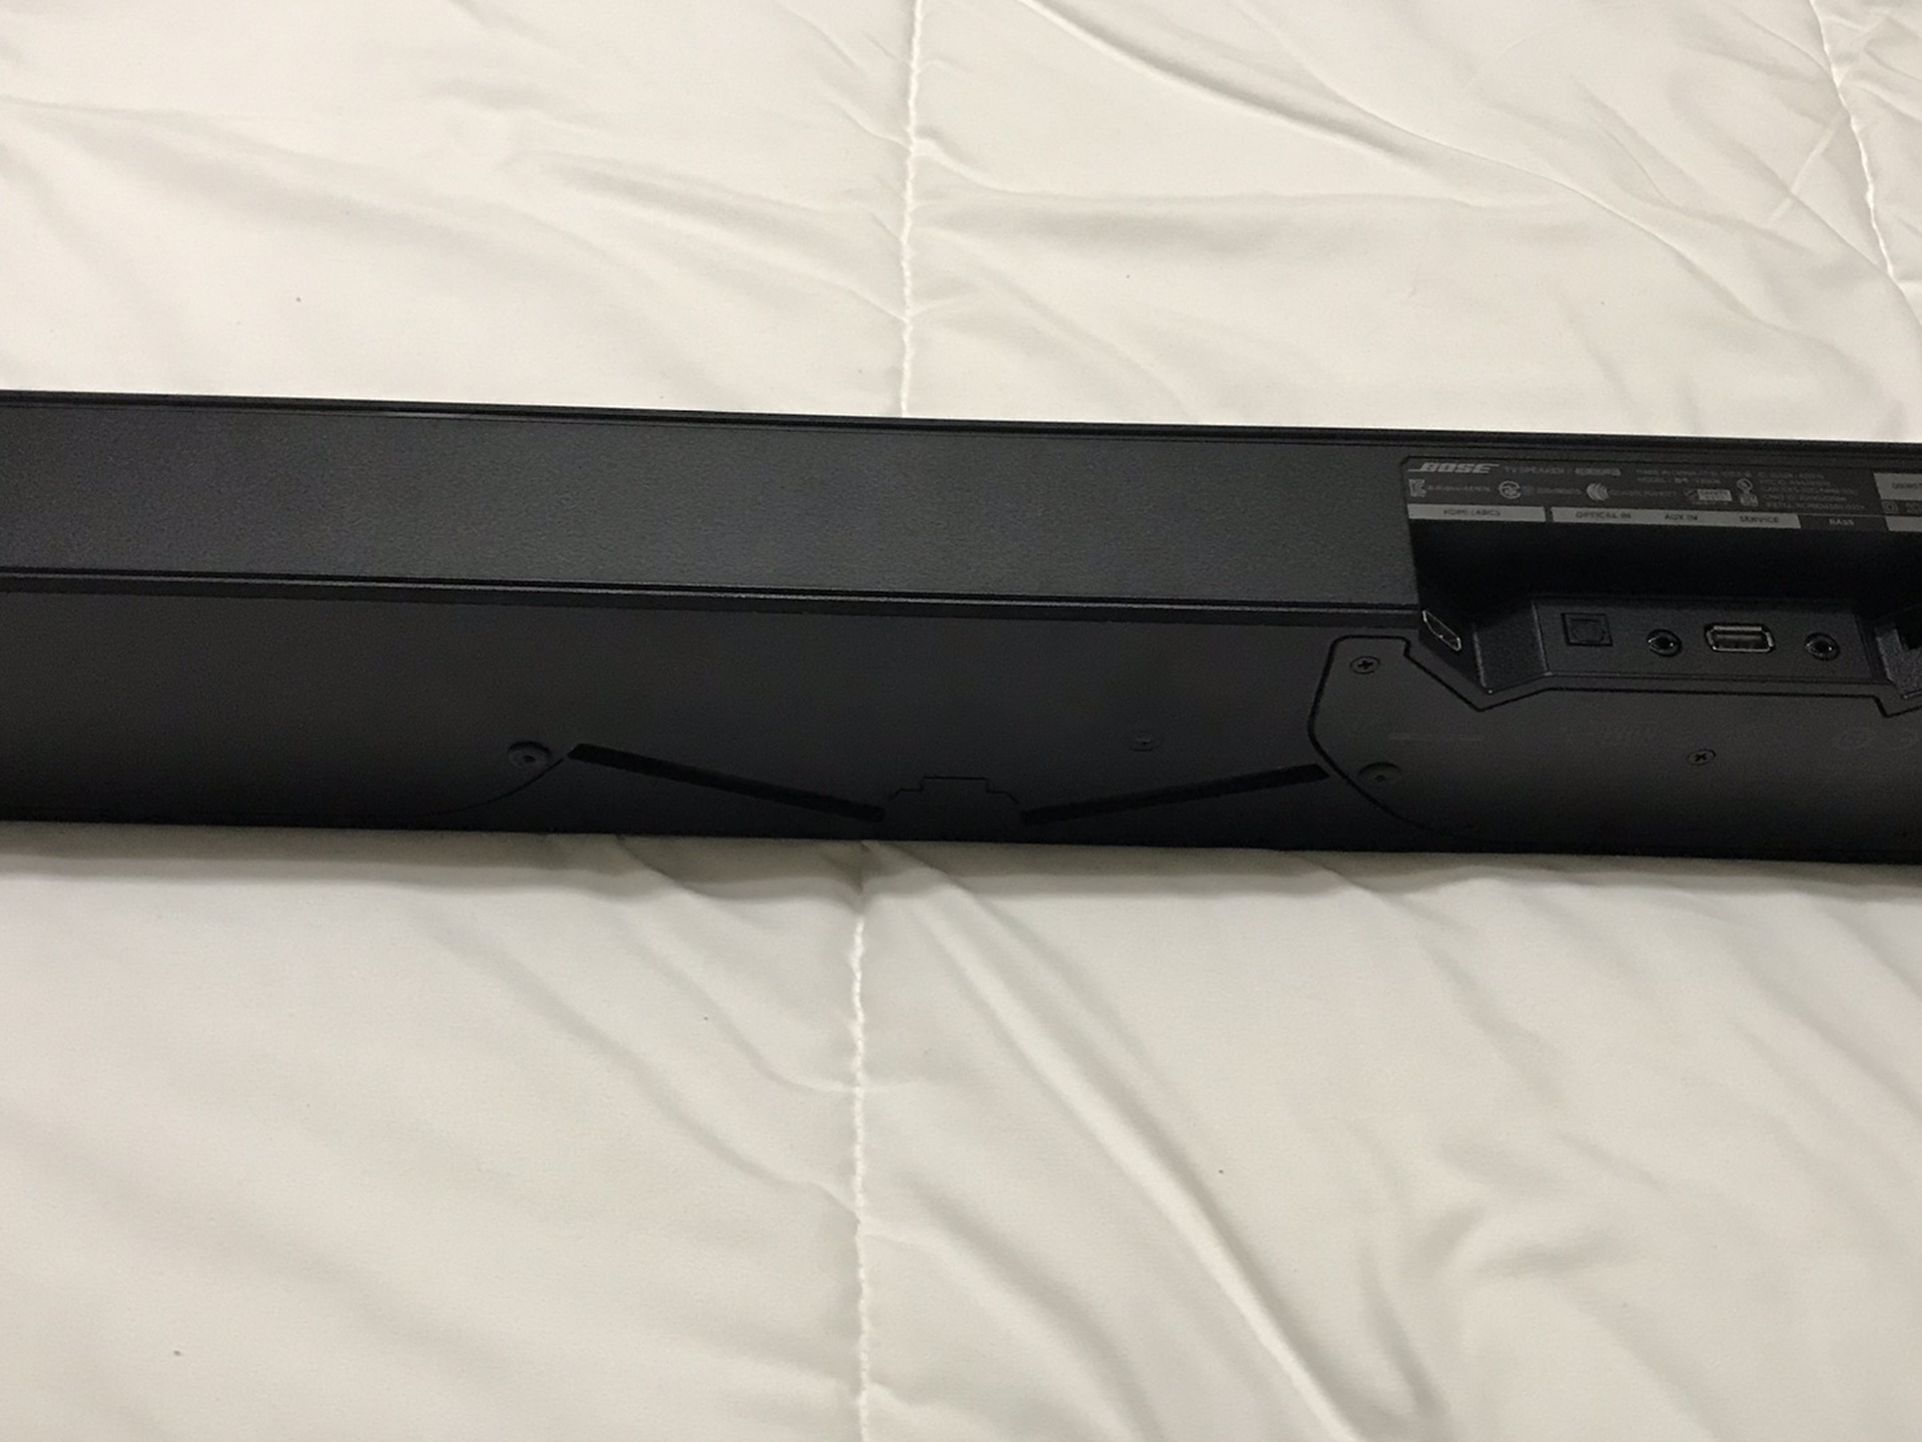 Bose TV Speaker - Small Soundbar with Bluetooth and HDMI-ARC Connectivity, Black. Includes remote control.